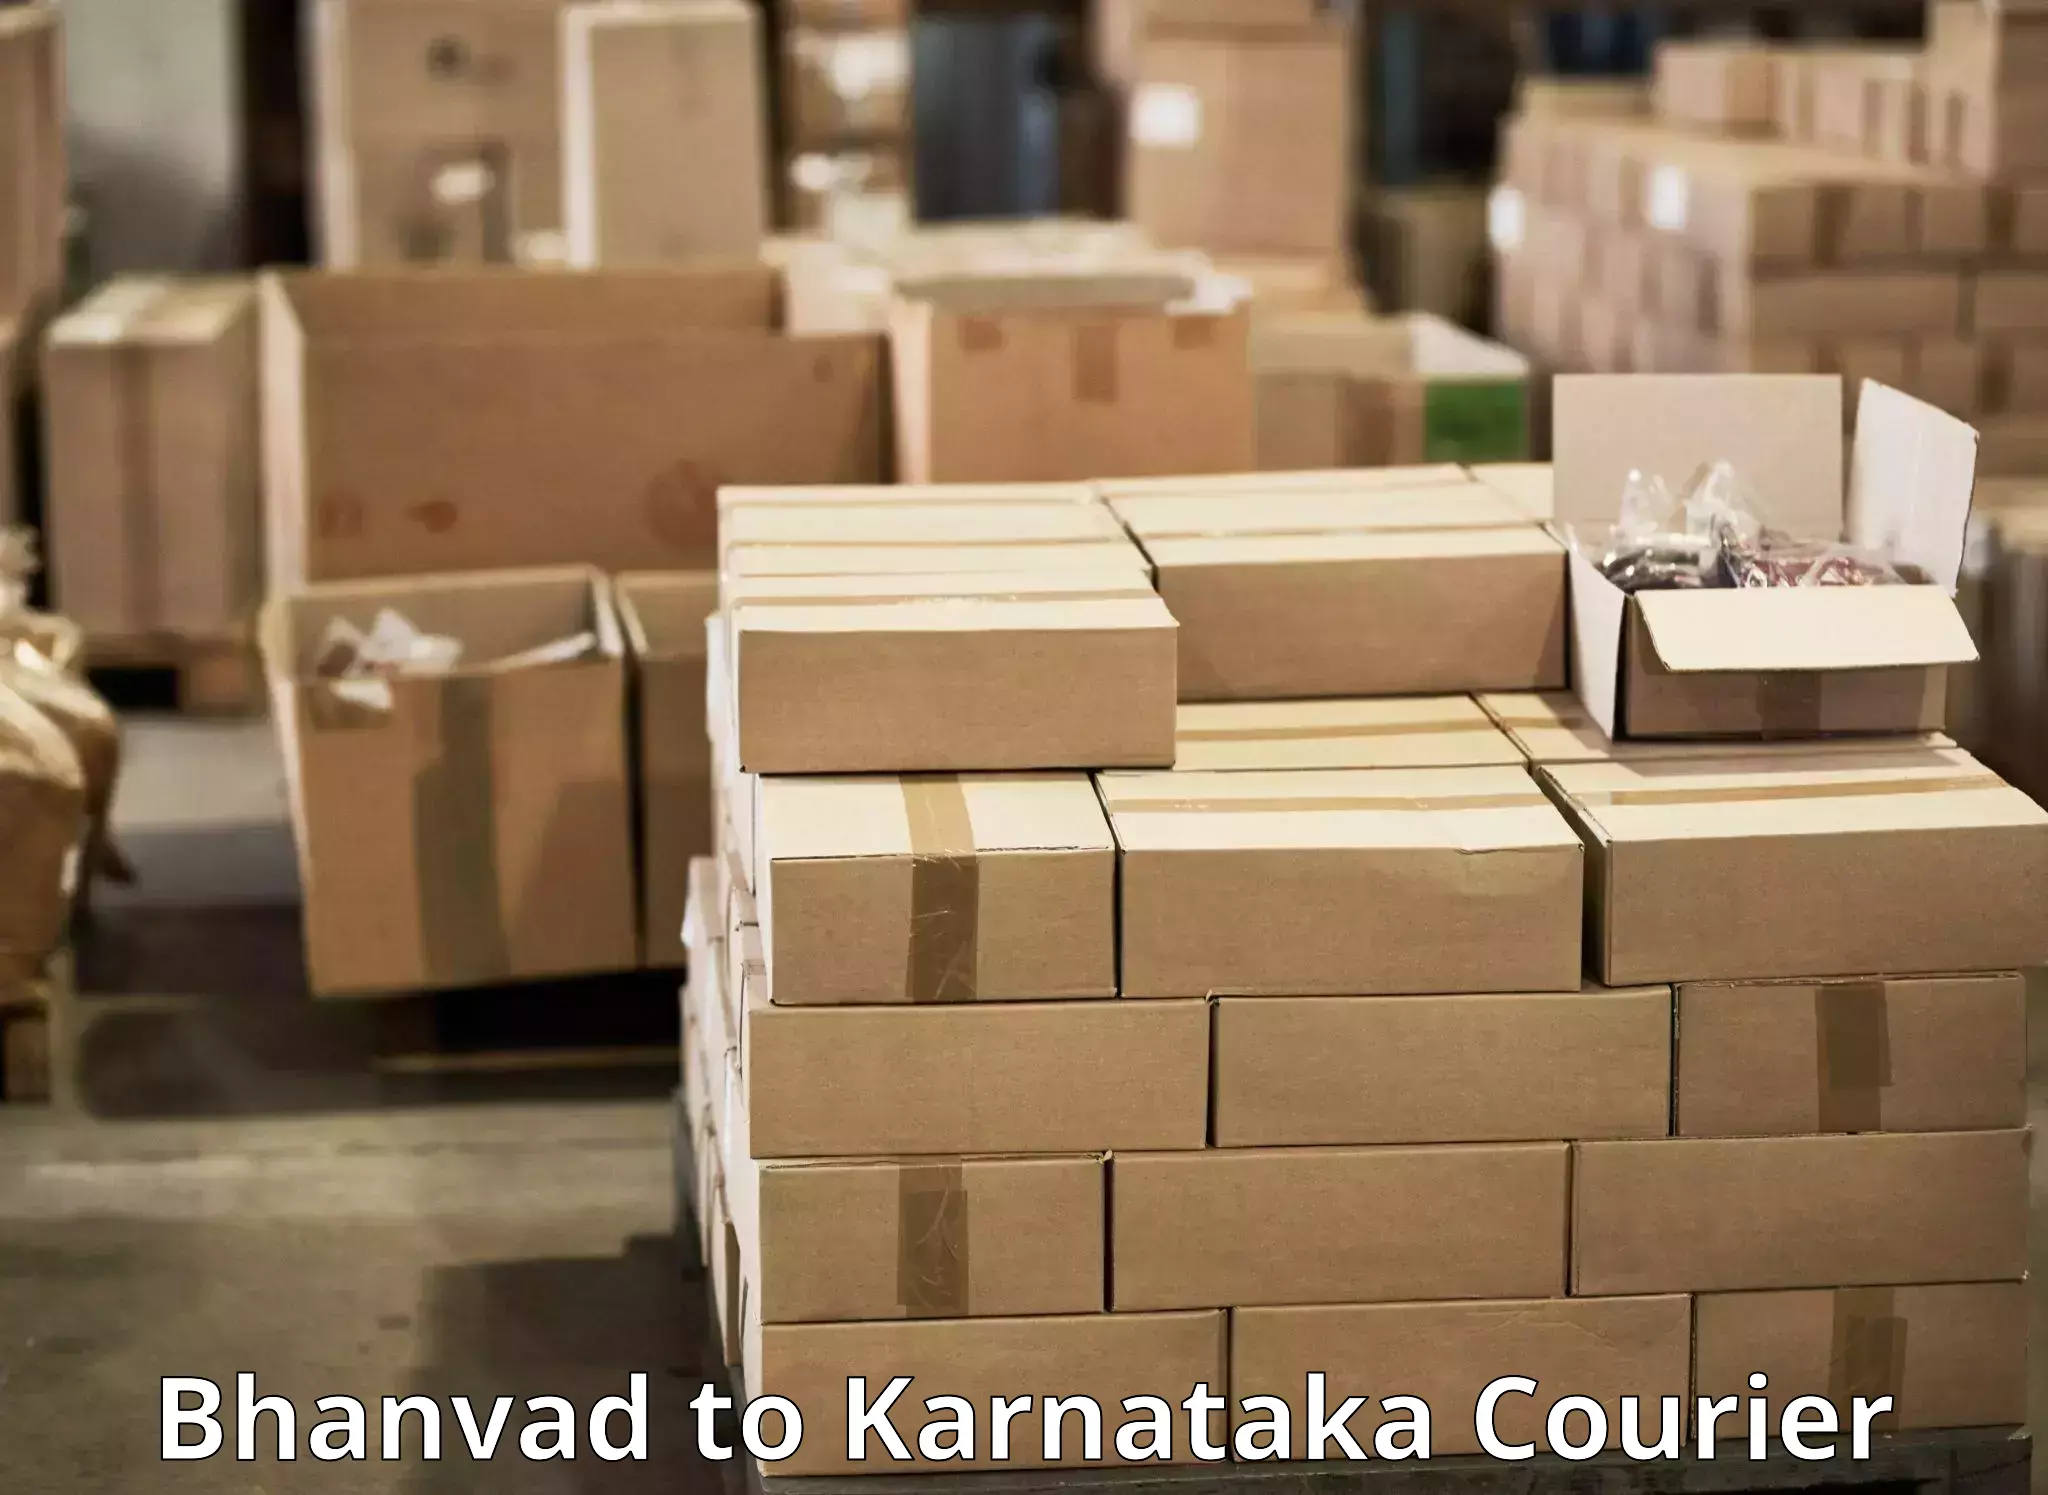 Full-service courier options Bhanvad to Manipal